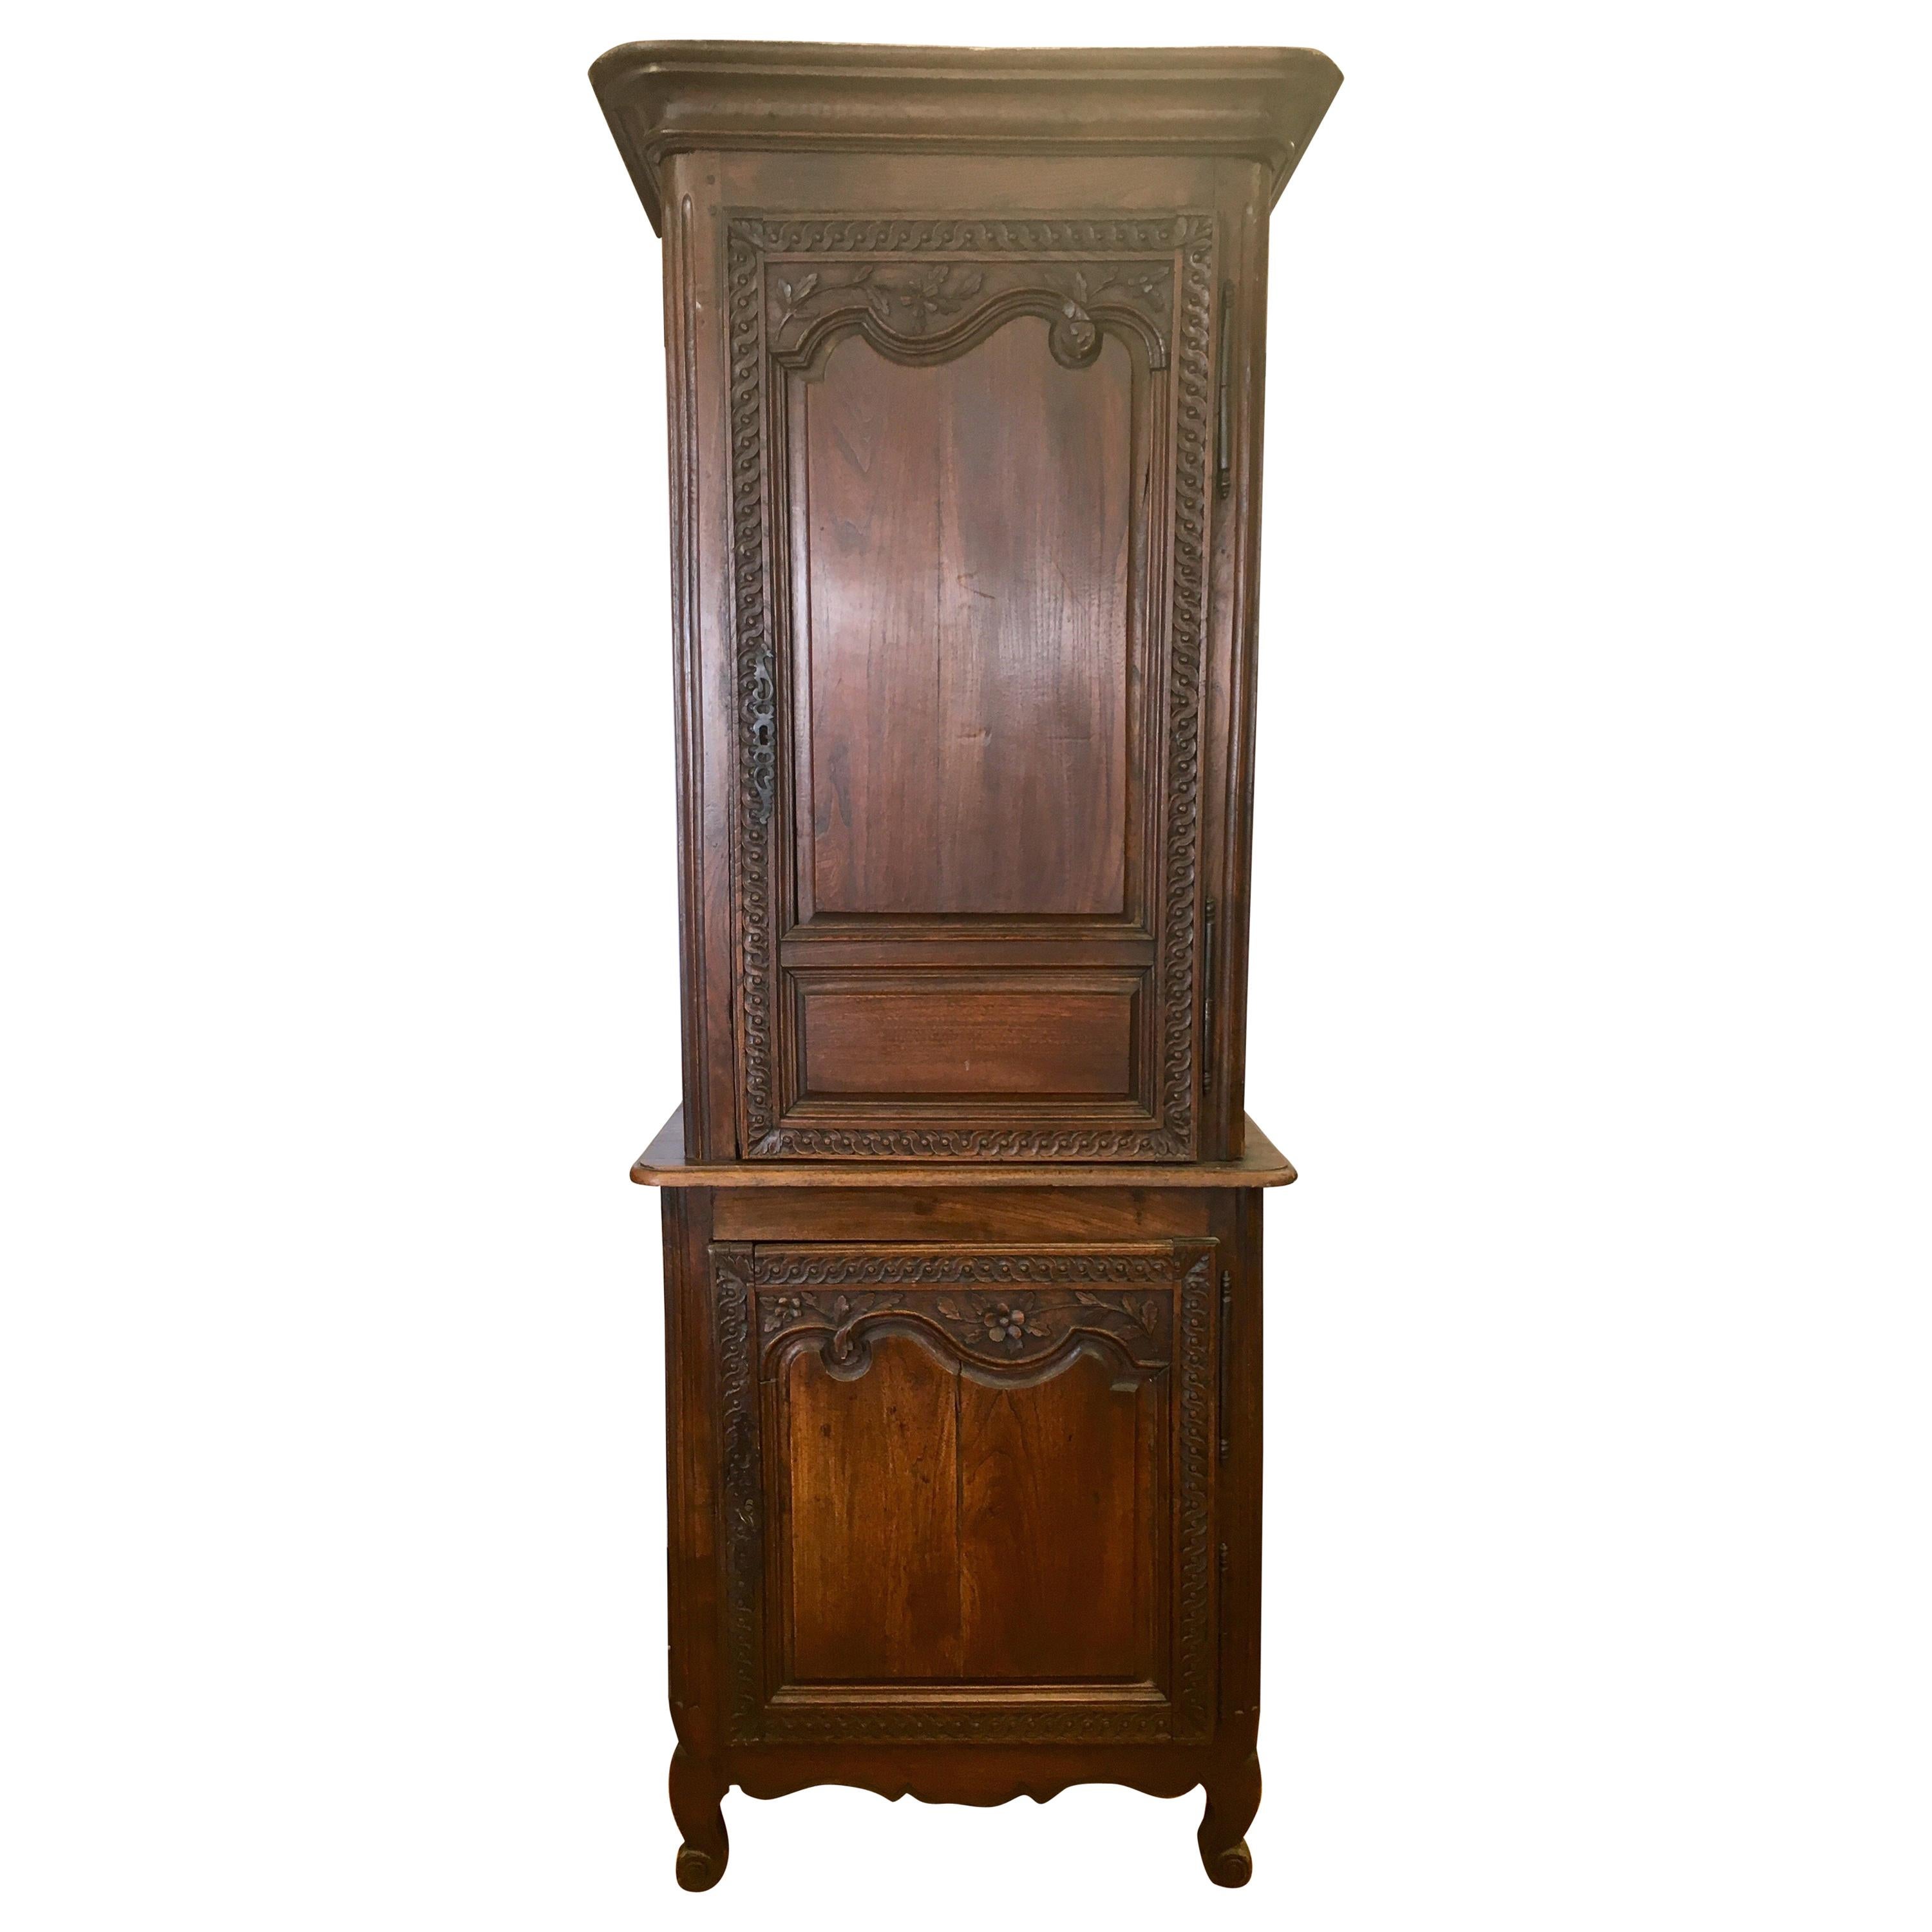 Exceptional Carved French Cabinet Armoire Early 19th Century Wardrobe